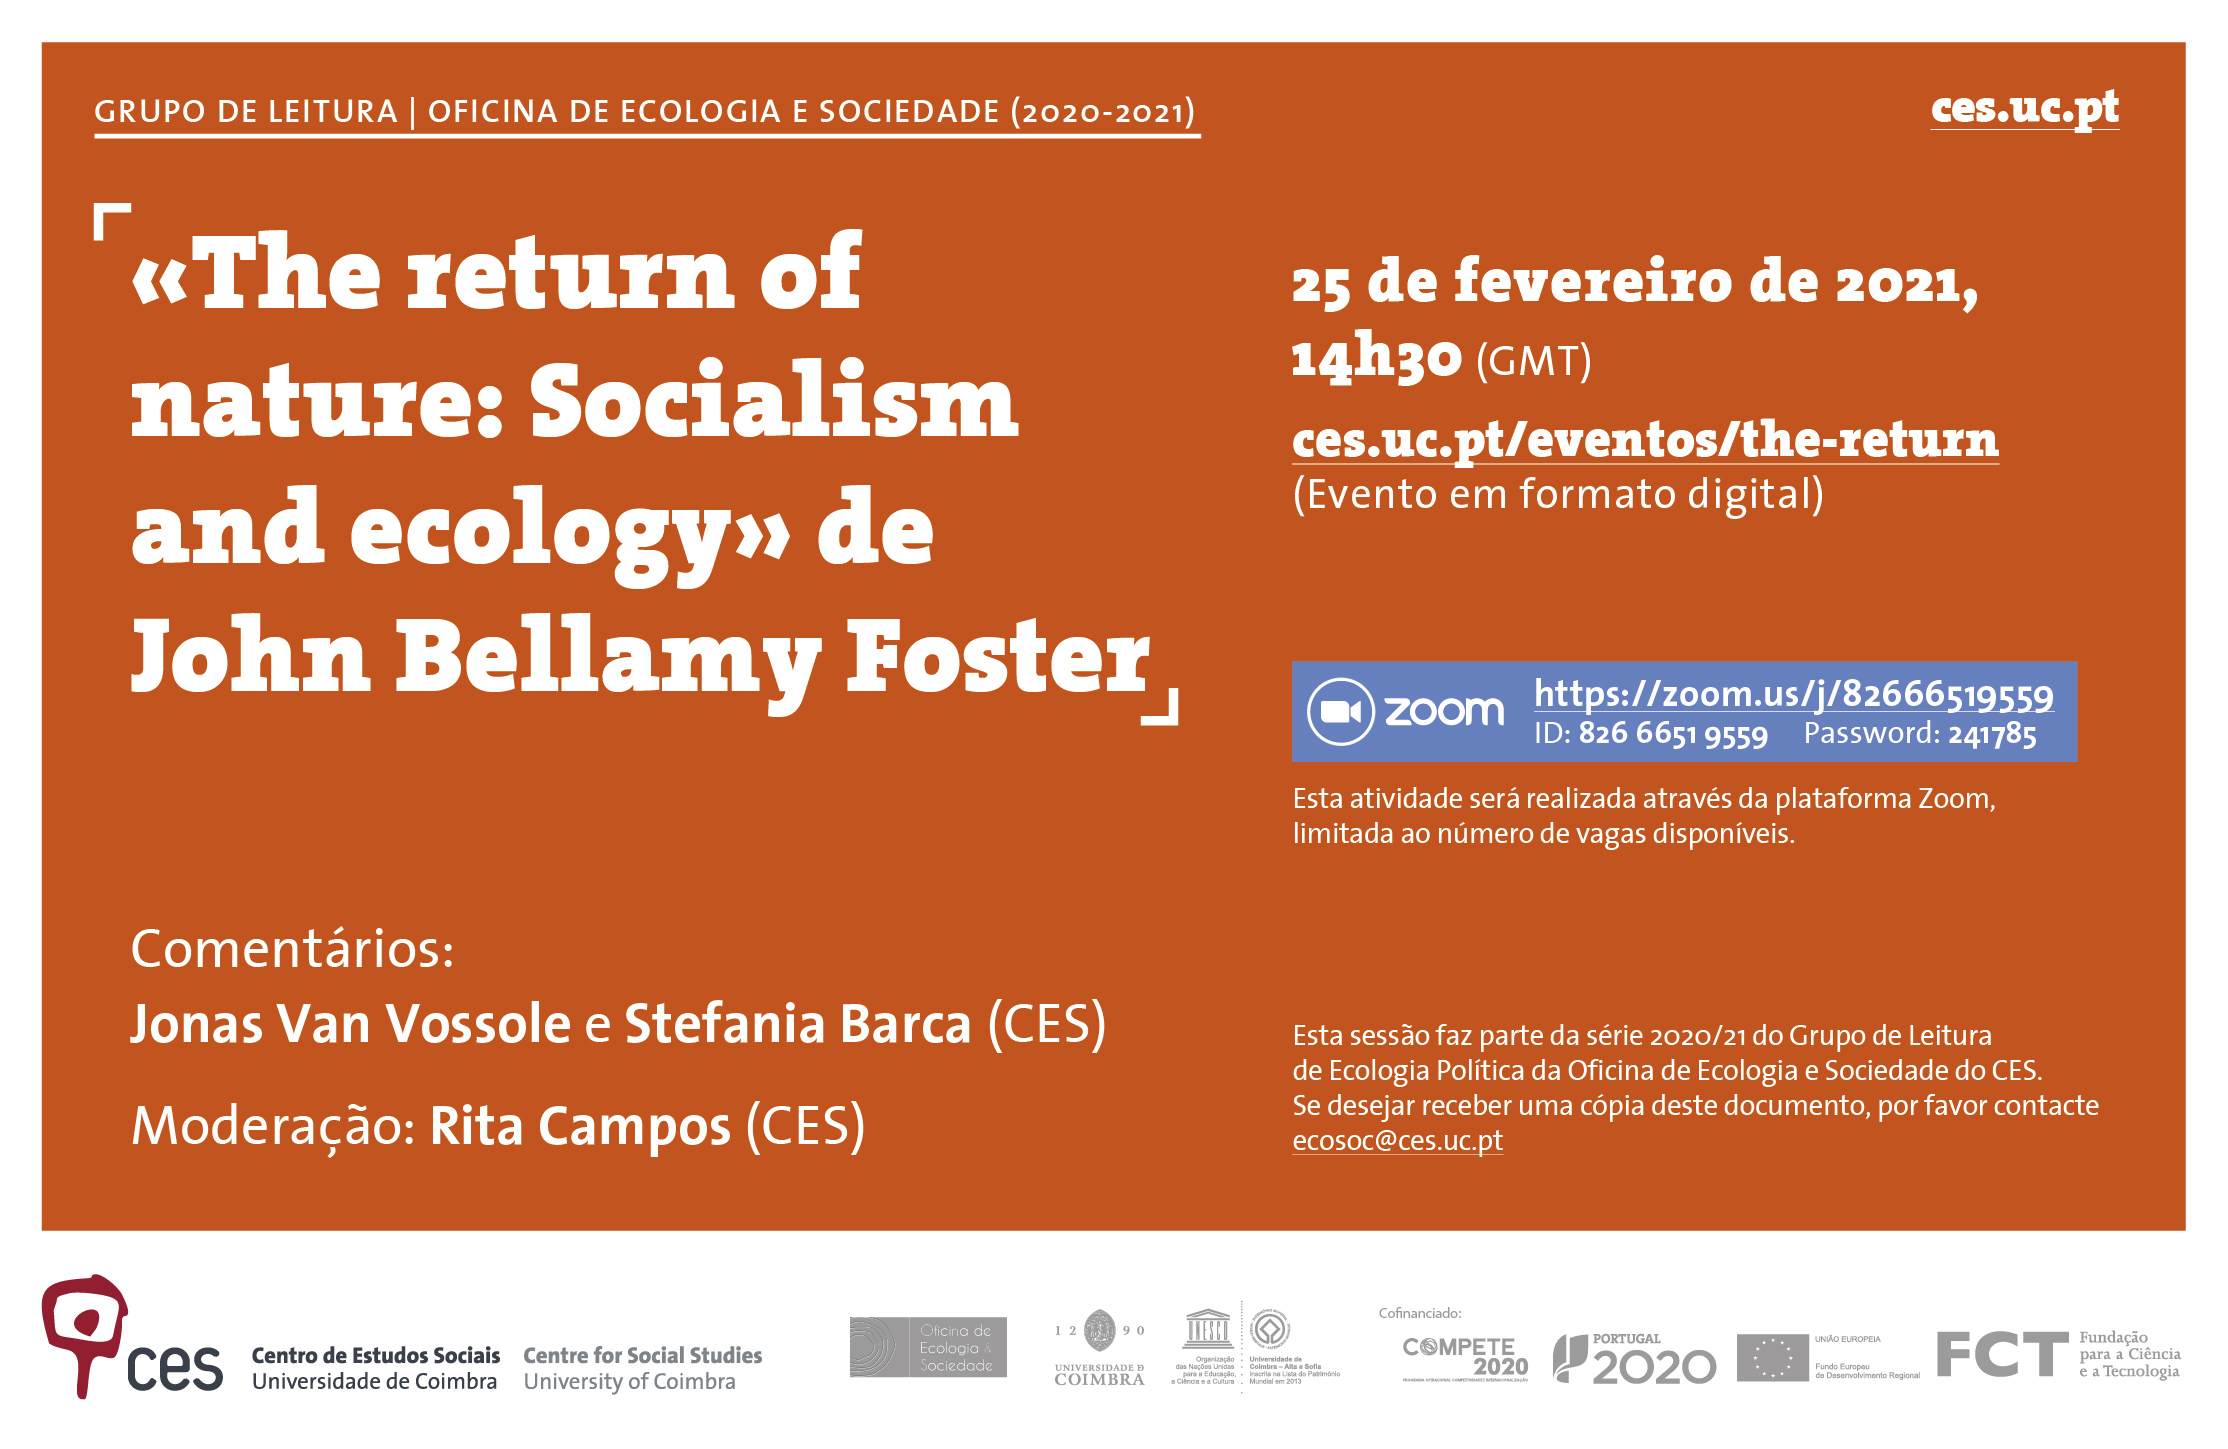 «The return of nature: Socialism and ecology» by John Bellamy Foster<span id="edit_31775"><script>$(function() { $('#edit_31775').load( "/myces/user/editobj.php?tipo=evento&id=31775" ); });</script></span>